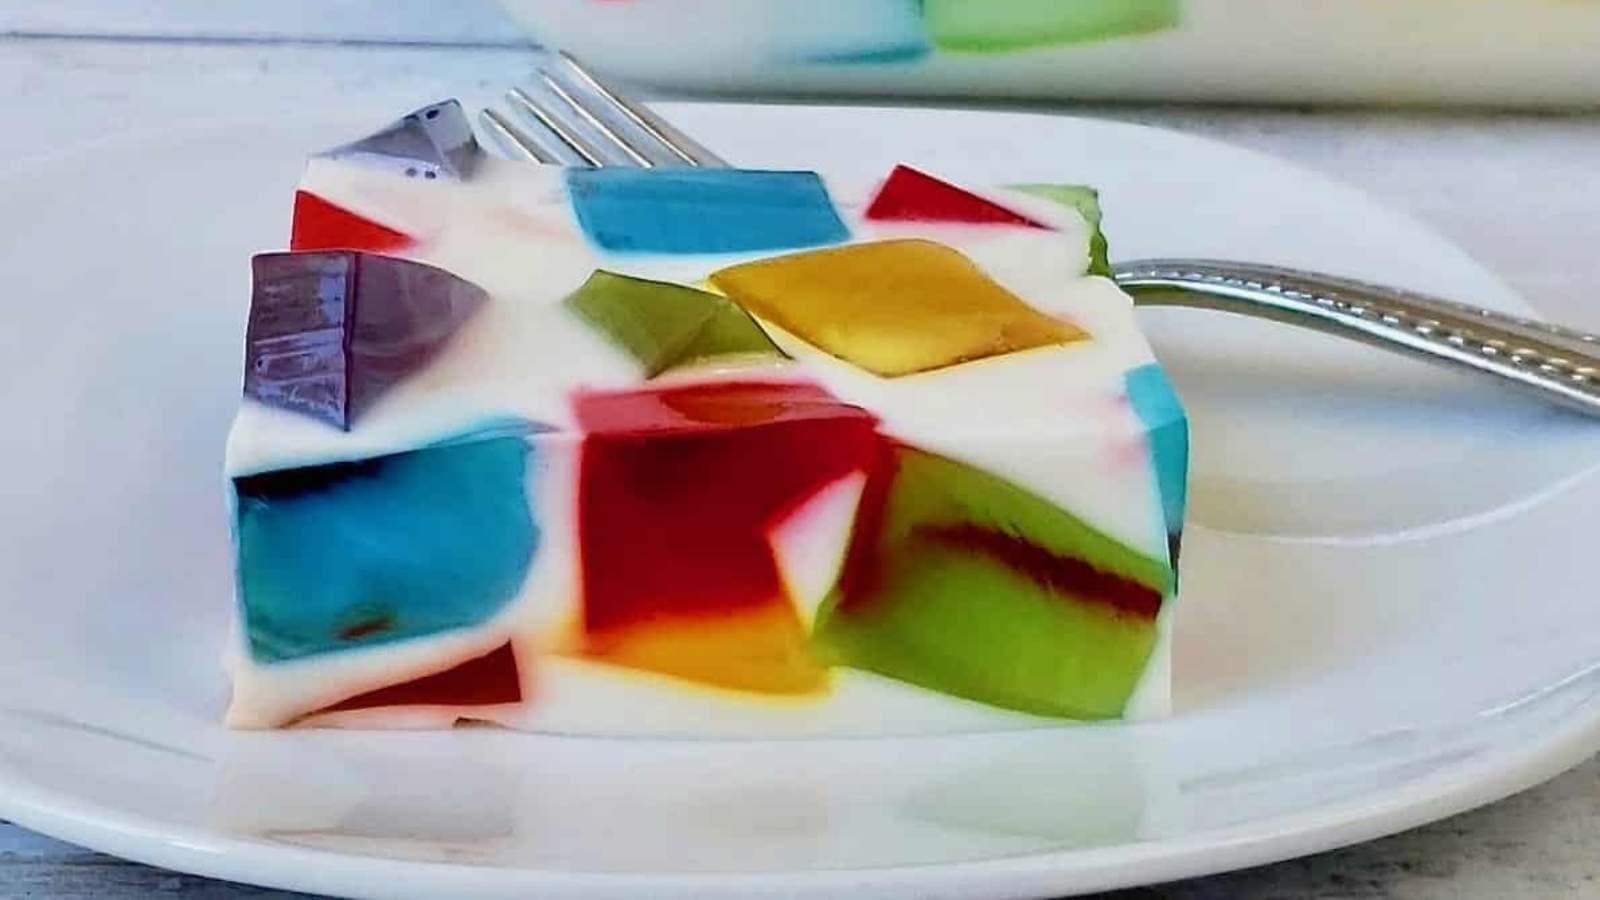 Stained Glass Jello Salad recipe by Grits and Gouda